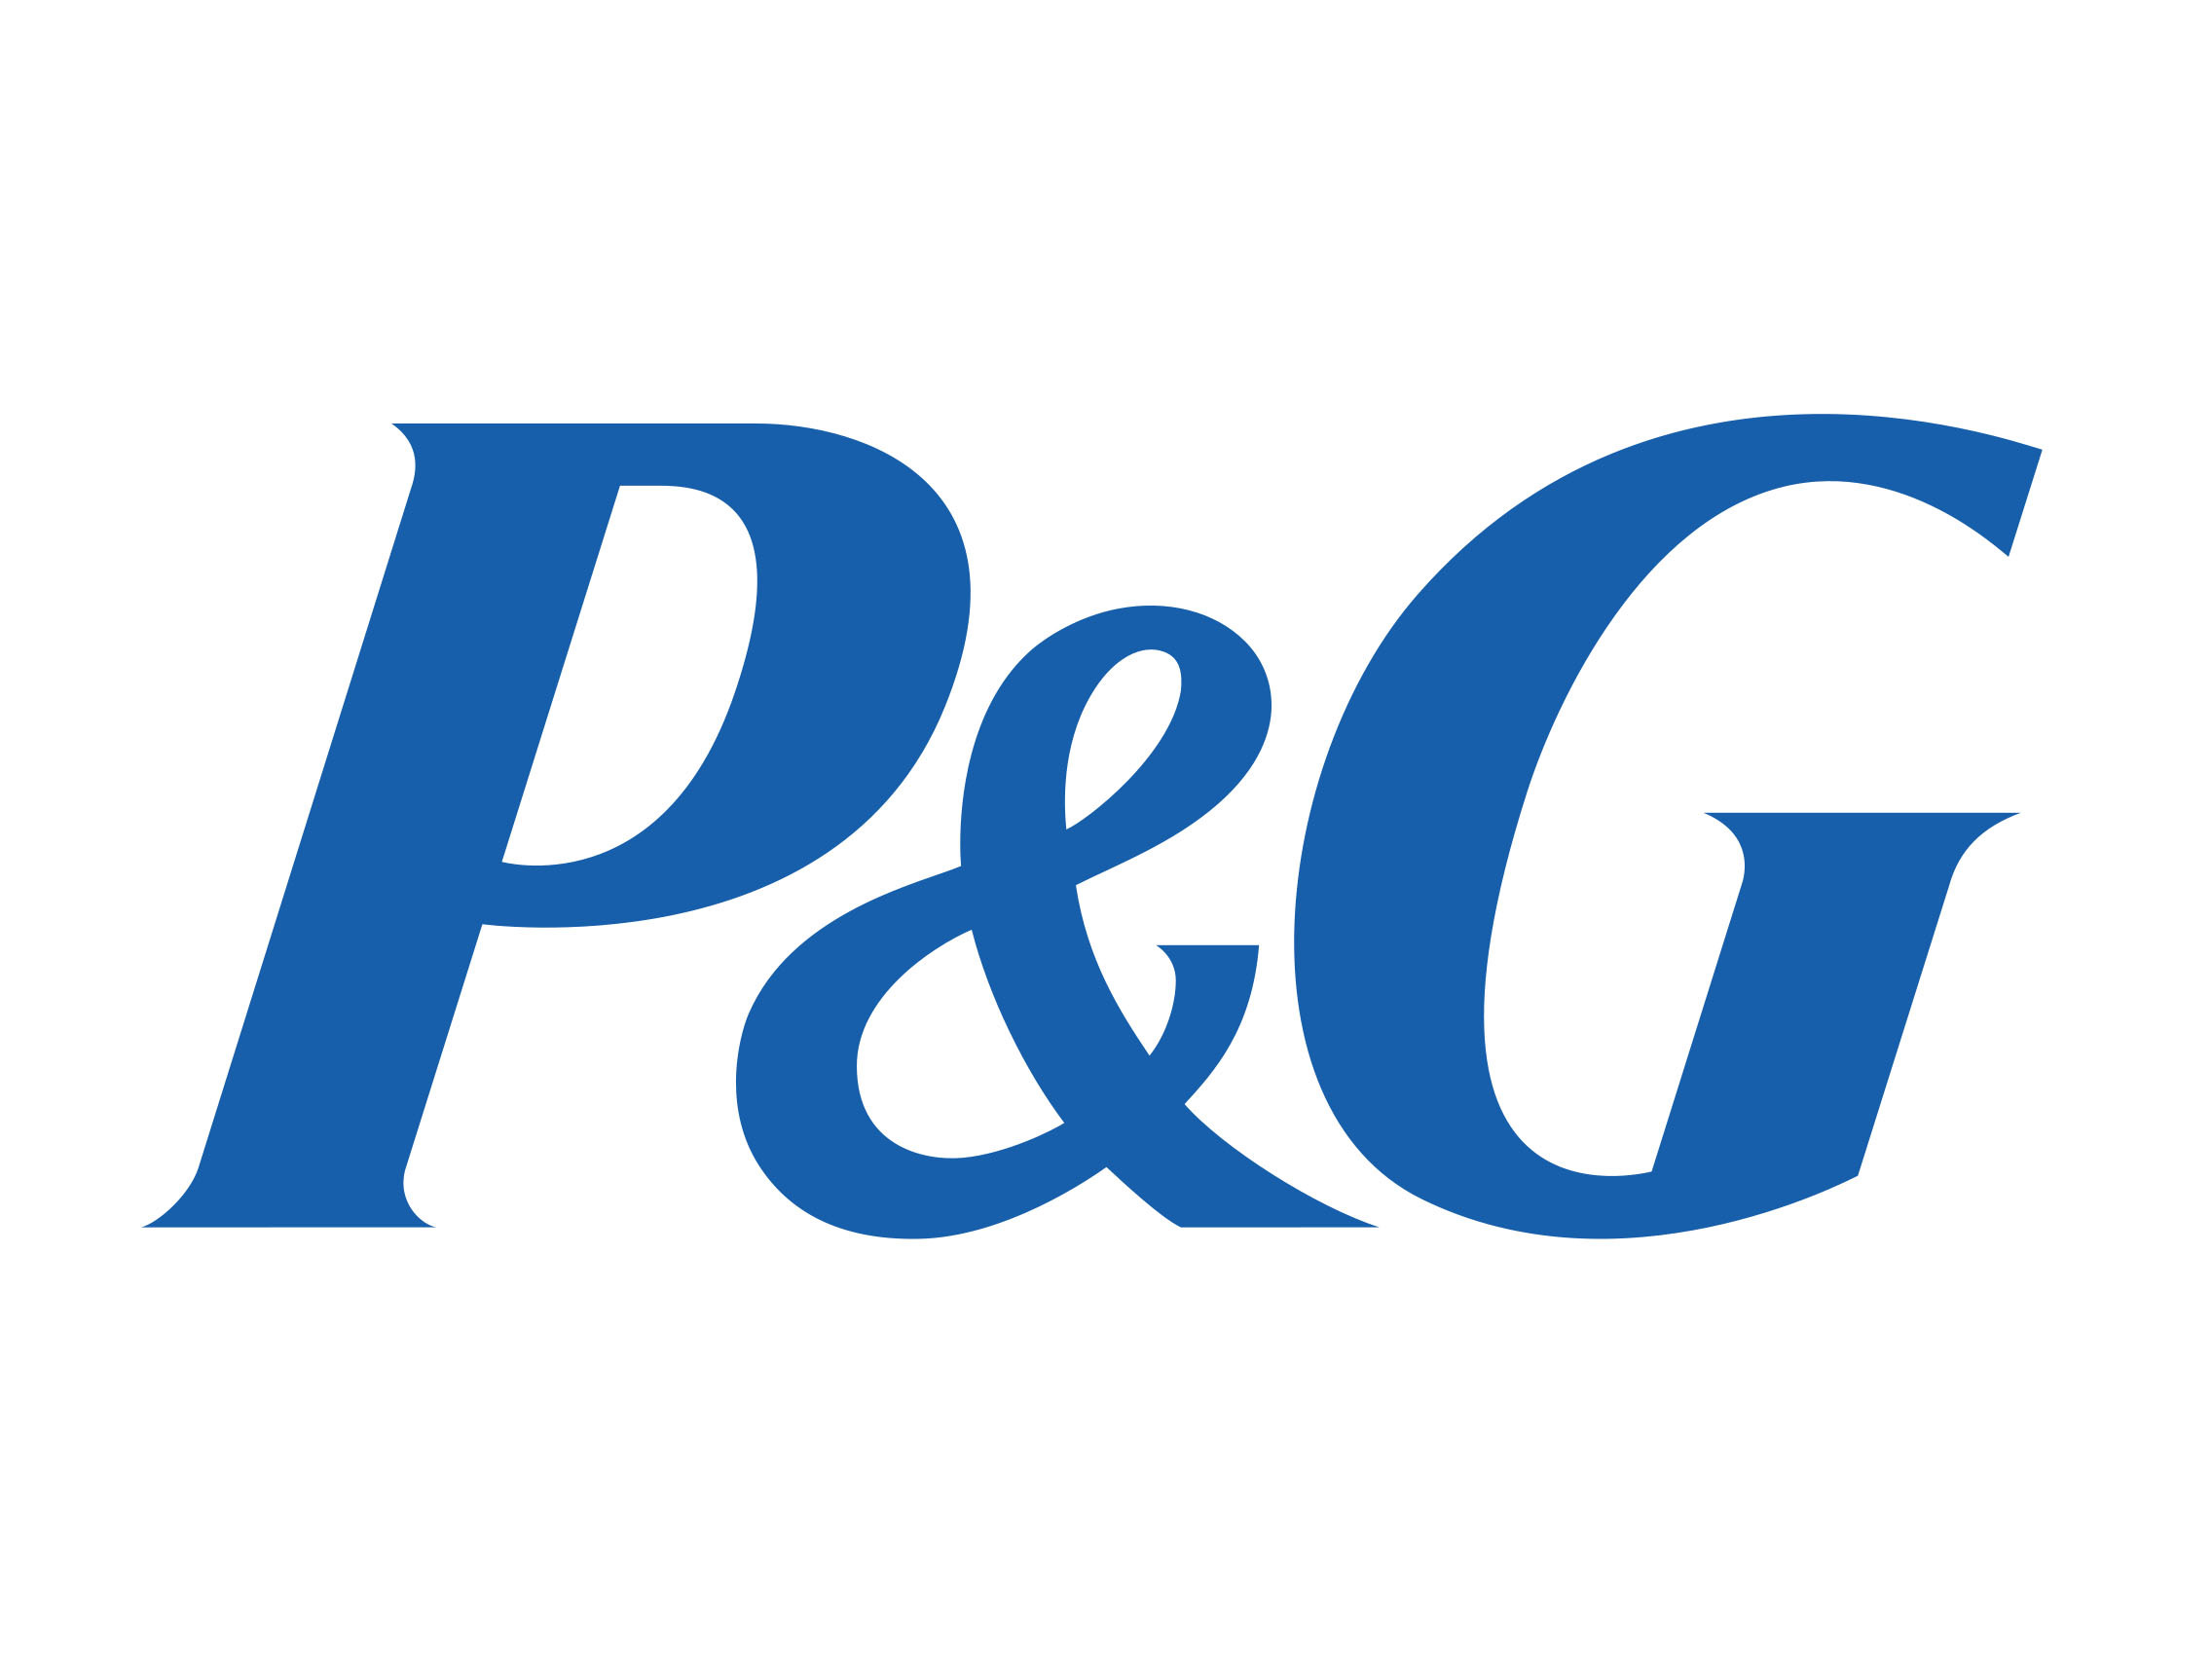 P&G to acquire Merck's consumer health business for $4.21 billion